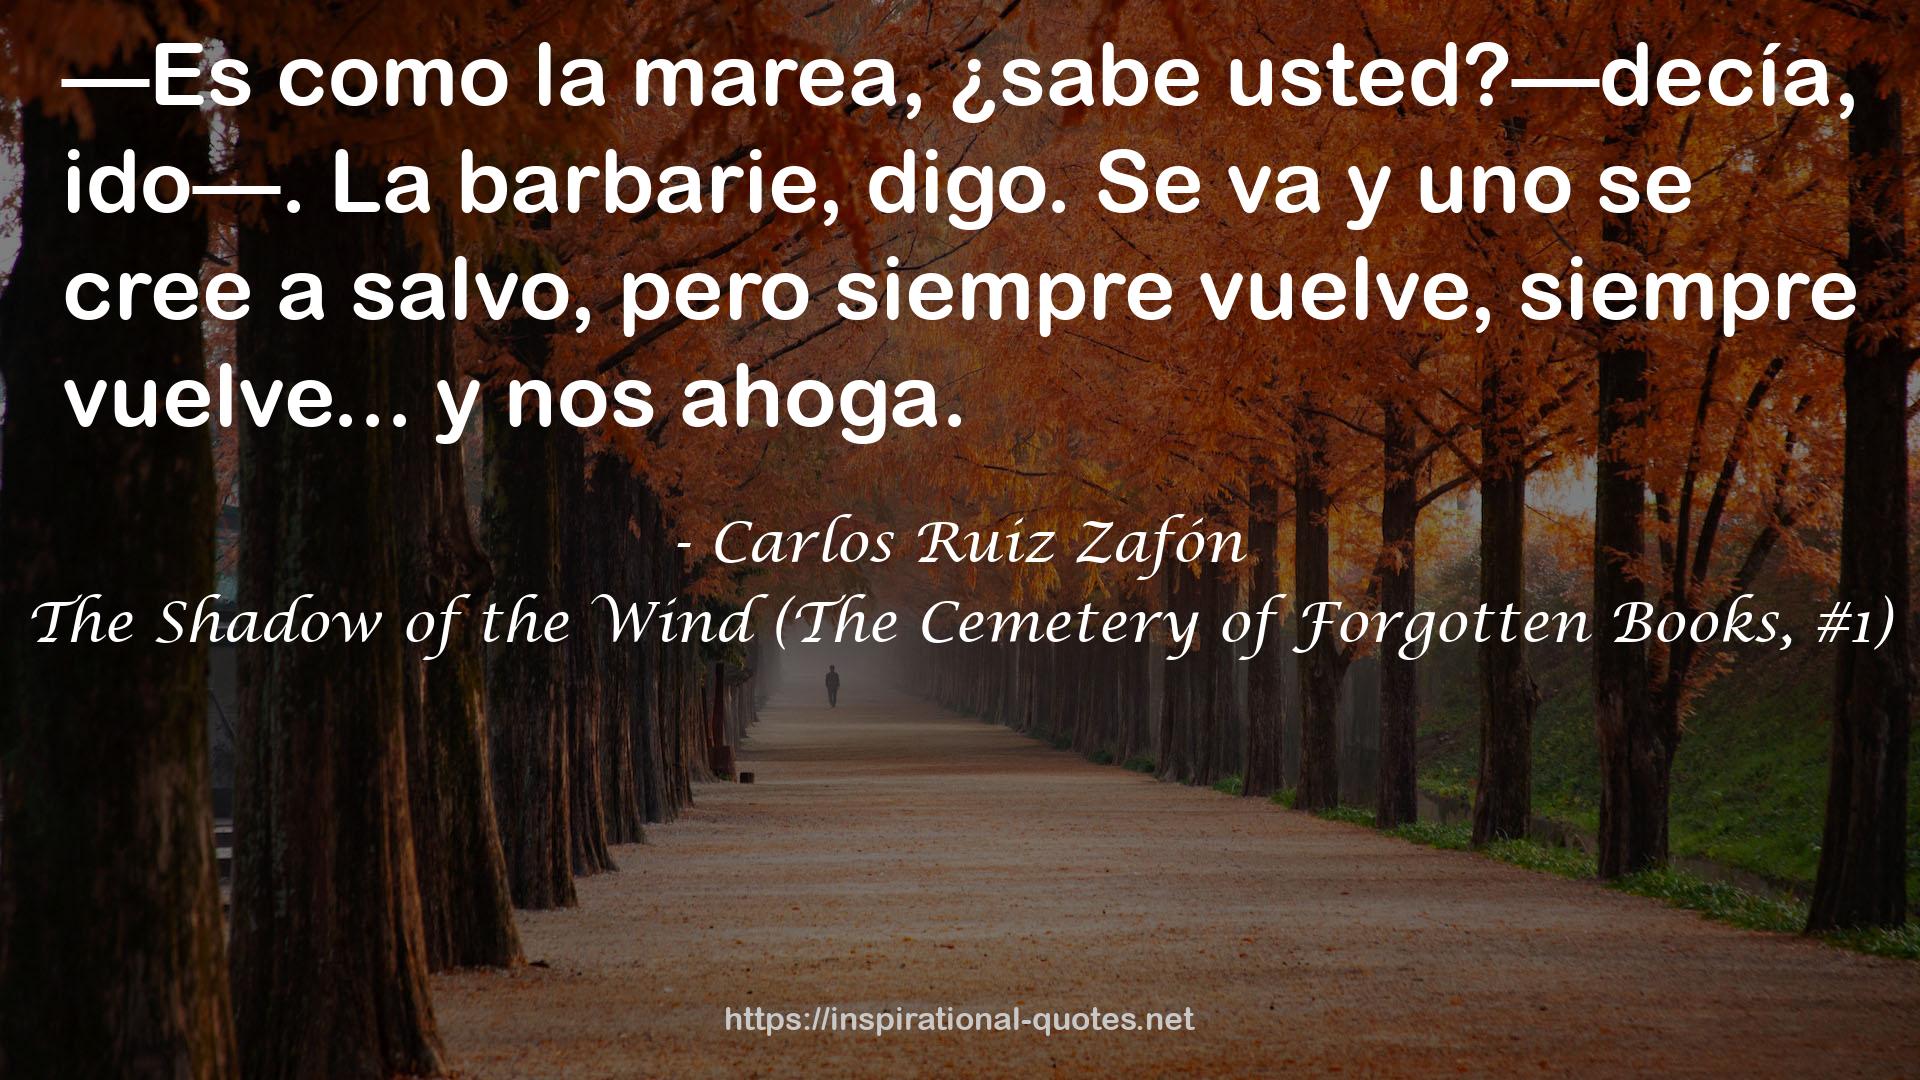 The Shadow of the Wind (The Cemetery of Forgotten Books, #1) QUOTES